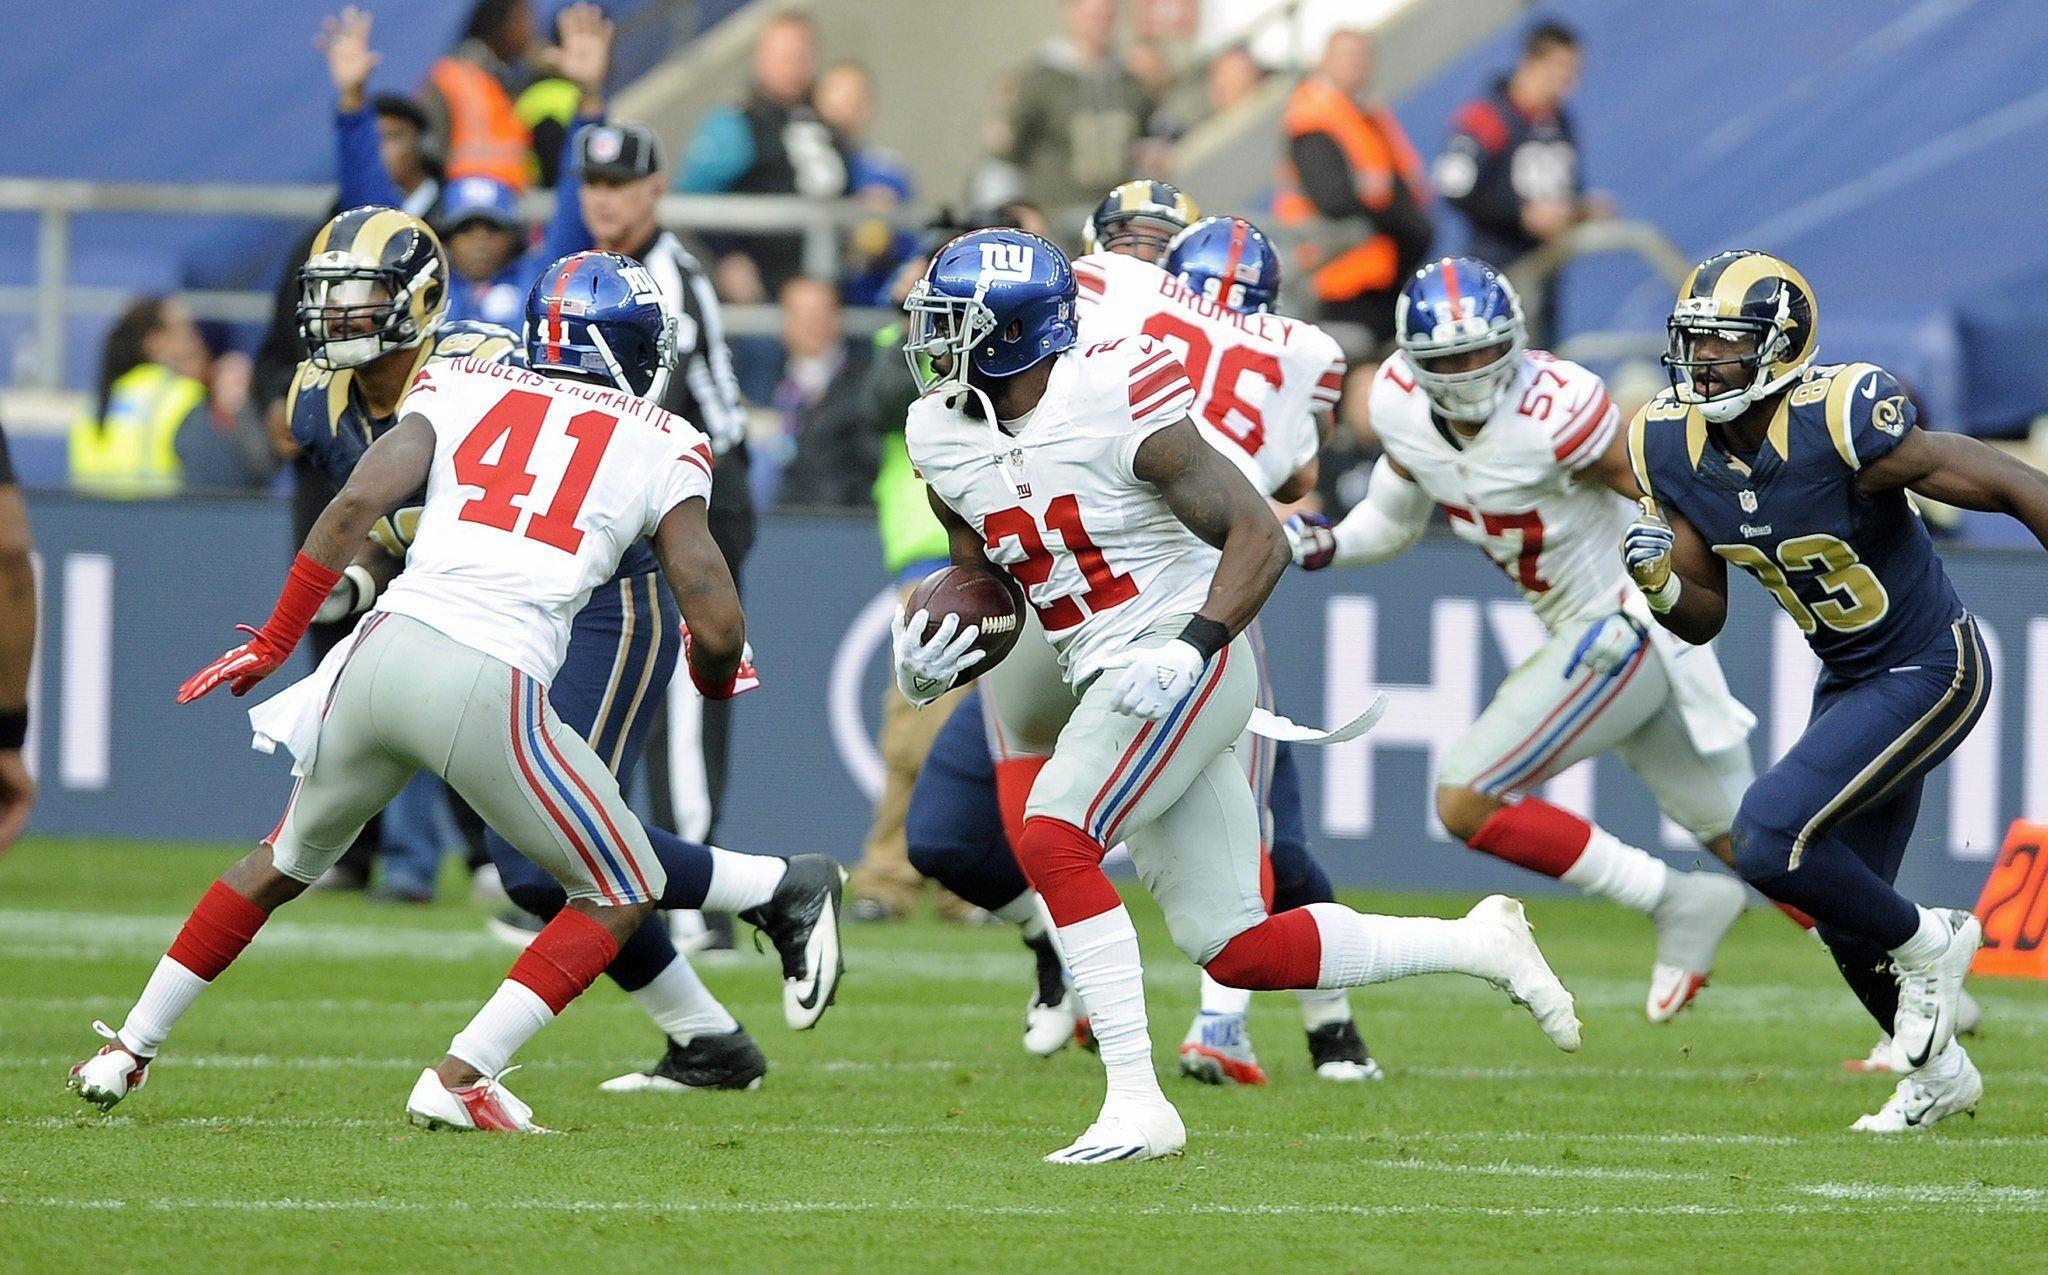 WATCH: Giants' Landon Collins reels in 2nd INT off tipped pass